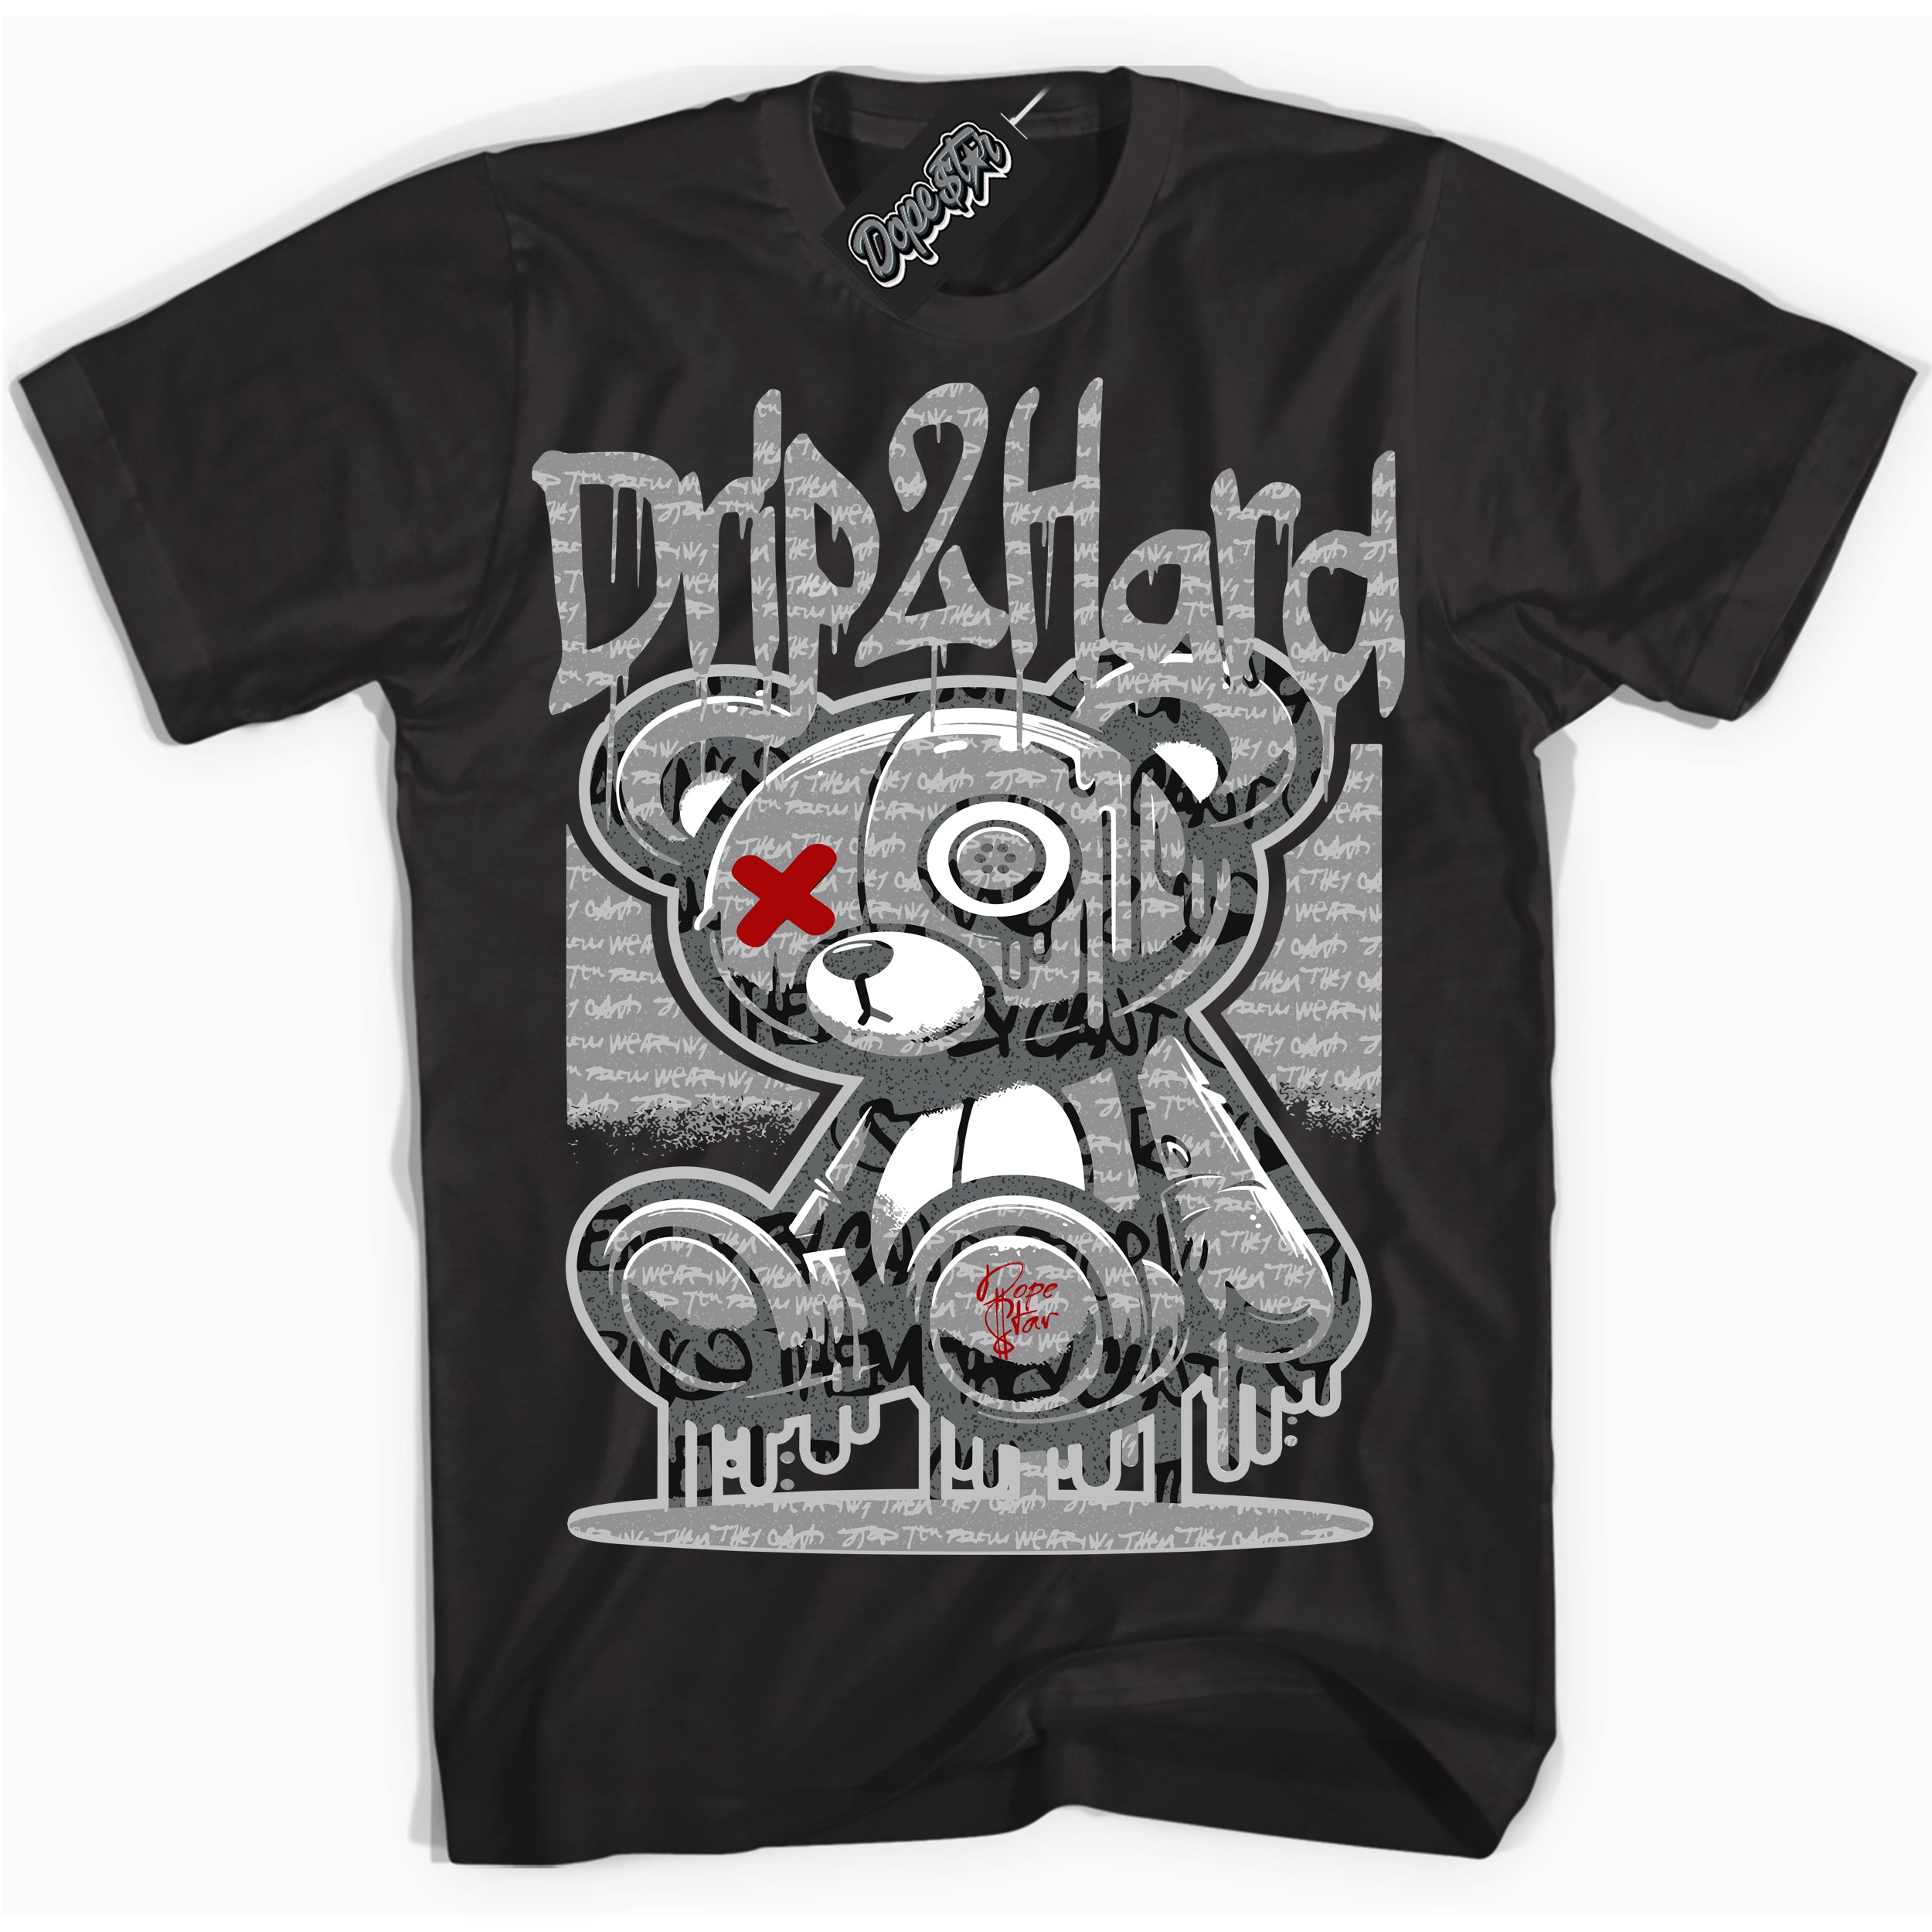 Cool Black graphic tee with “ Drip 2 Hard ” design, that perfectly matches Rebellionaire 1s